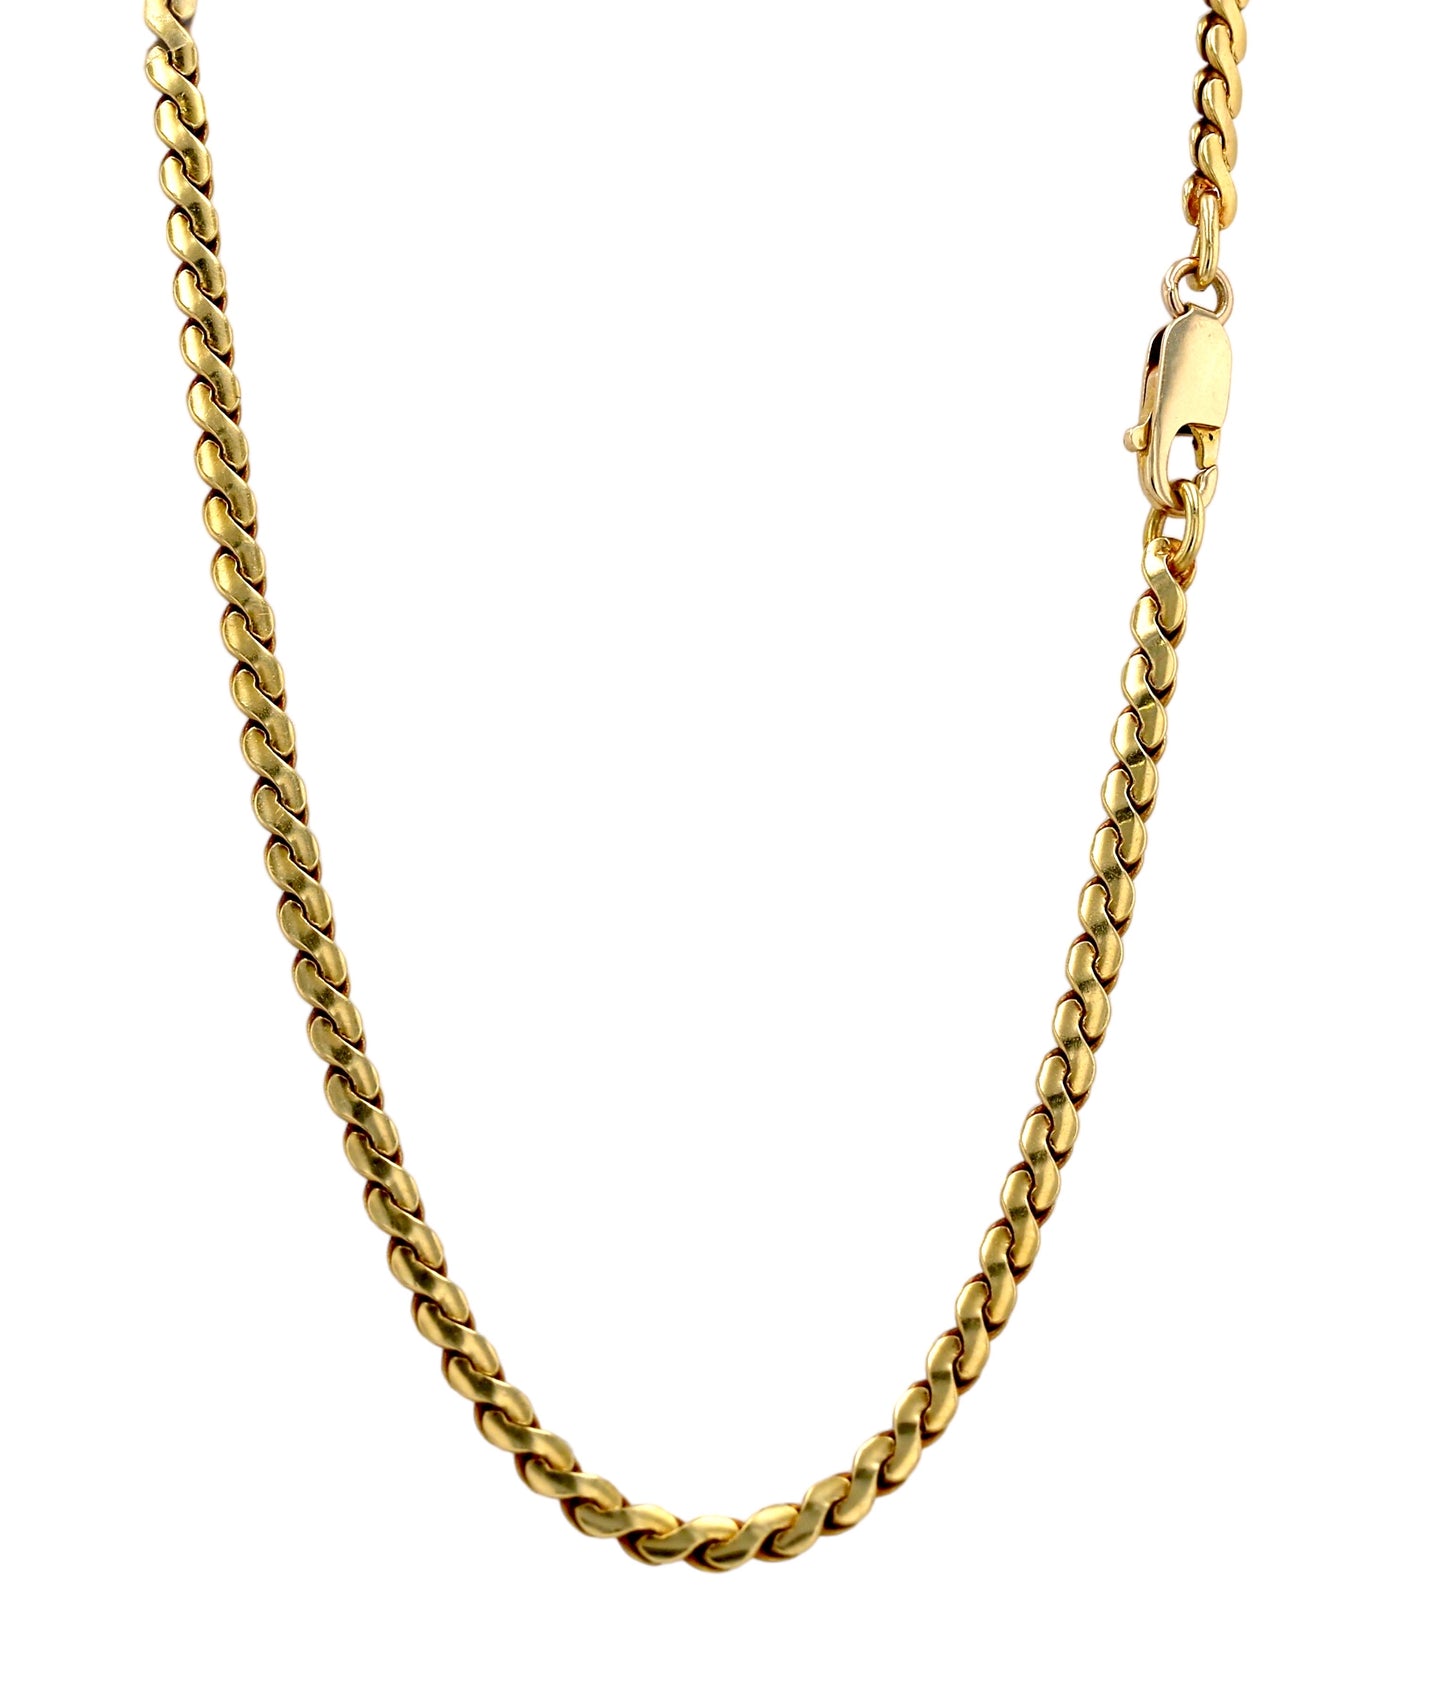 Yellow 18k solid vintage S chain